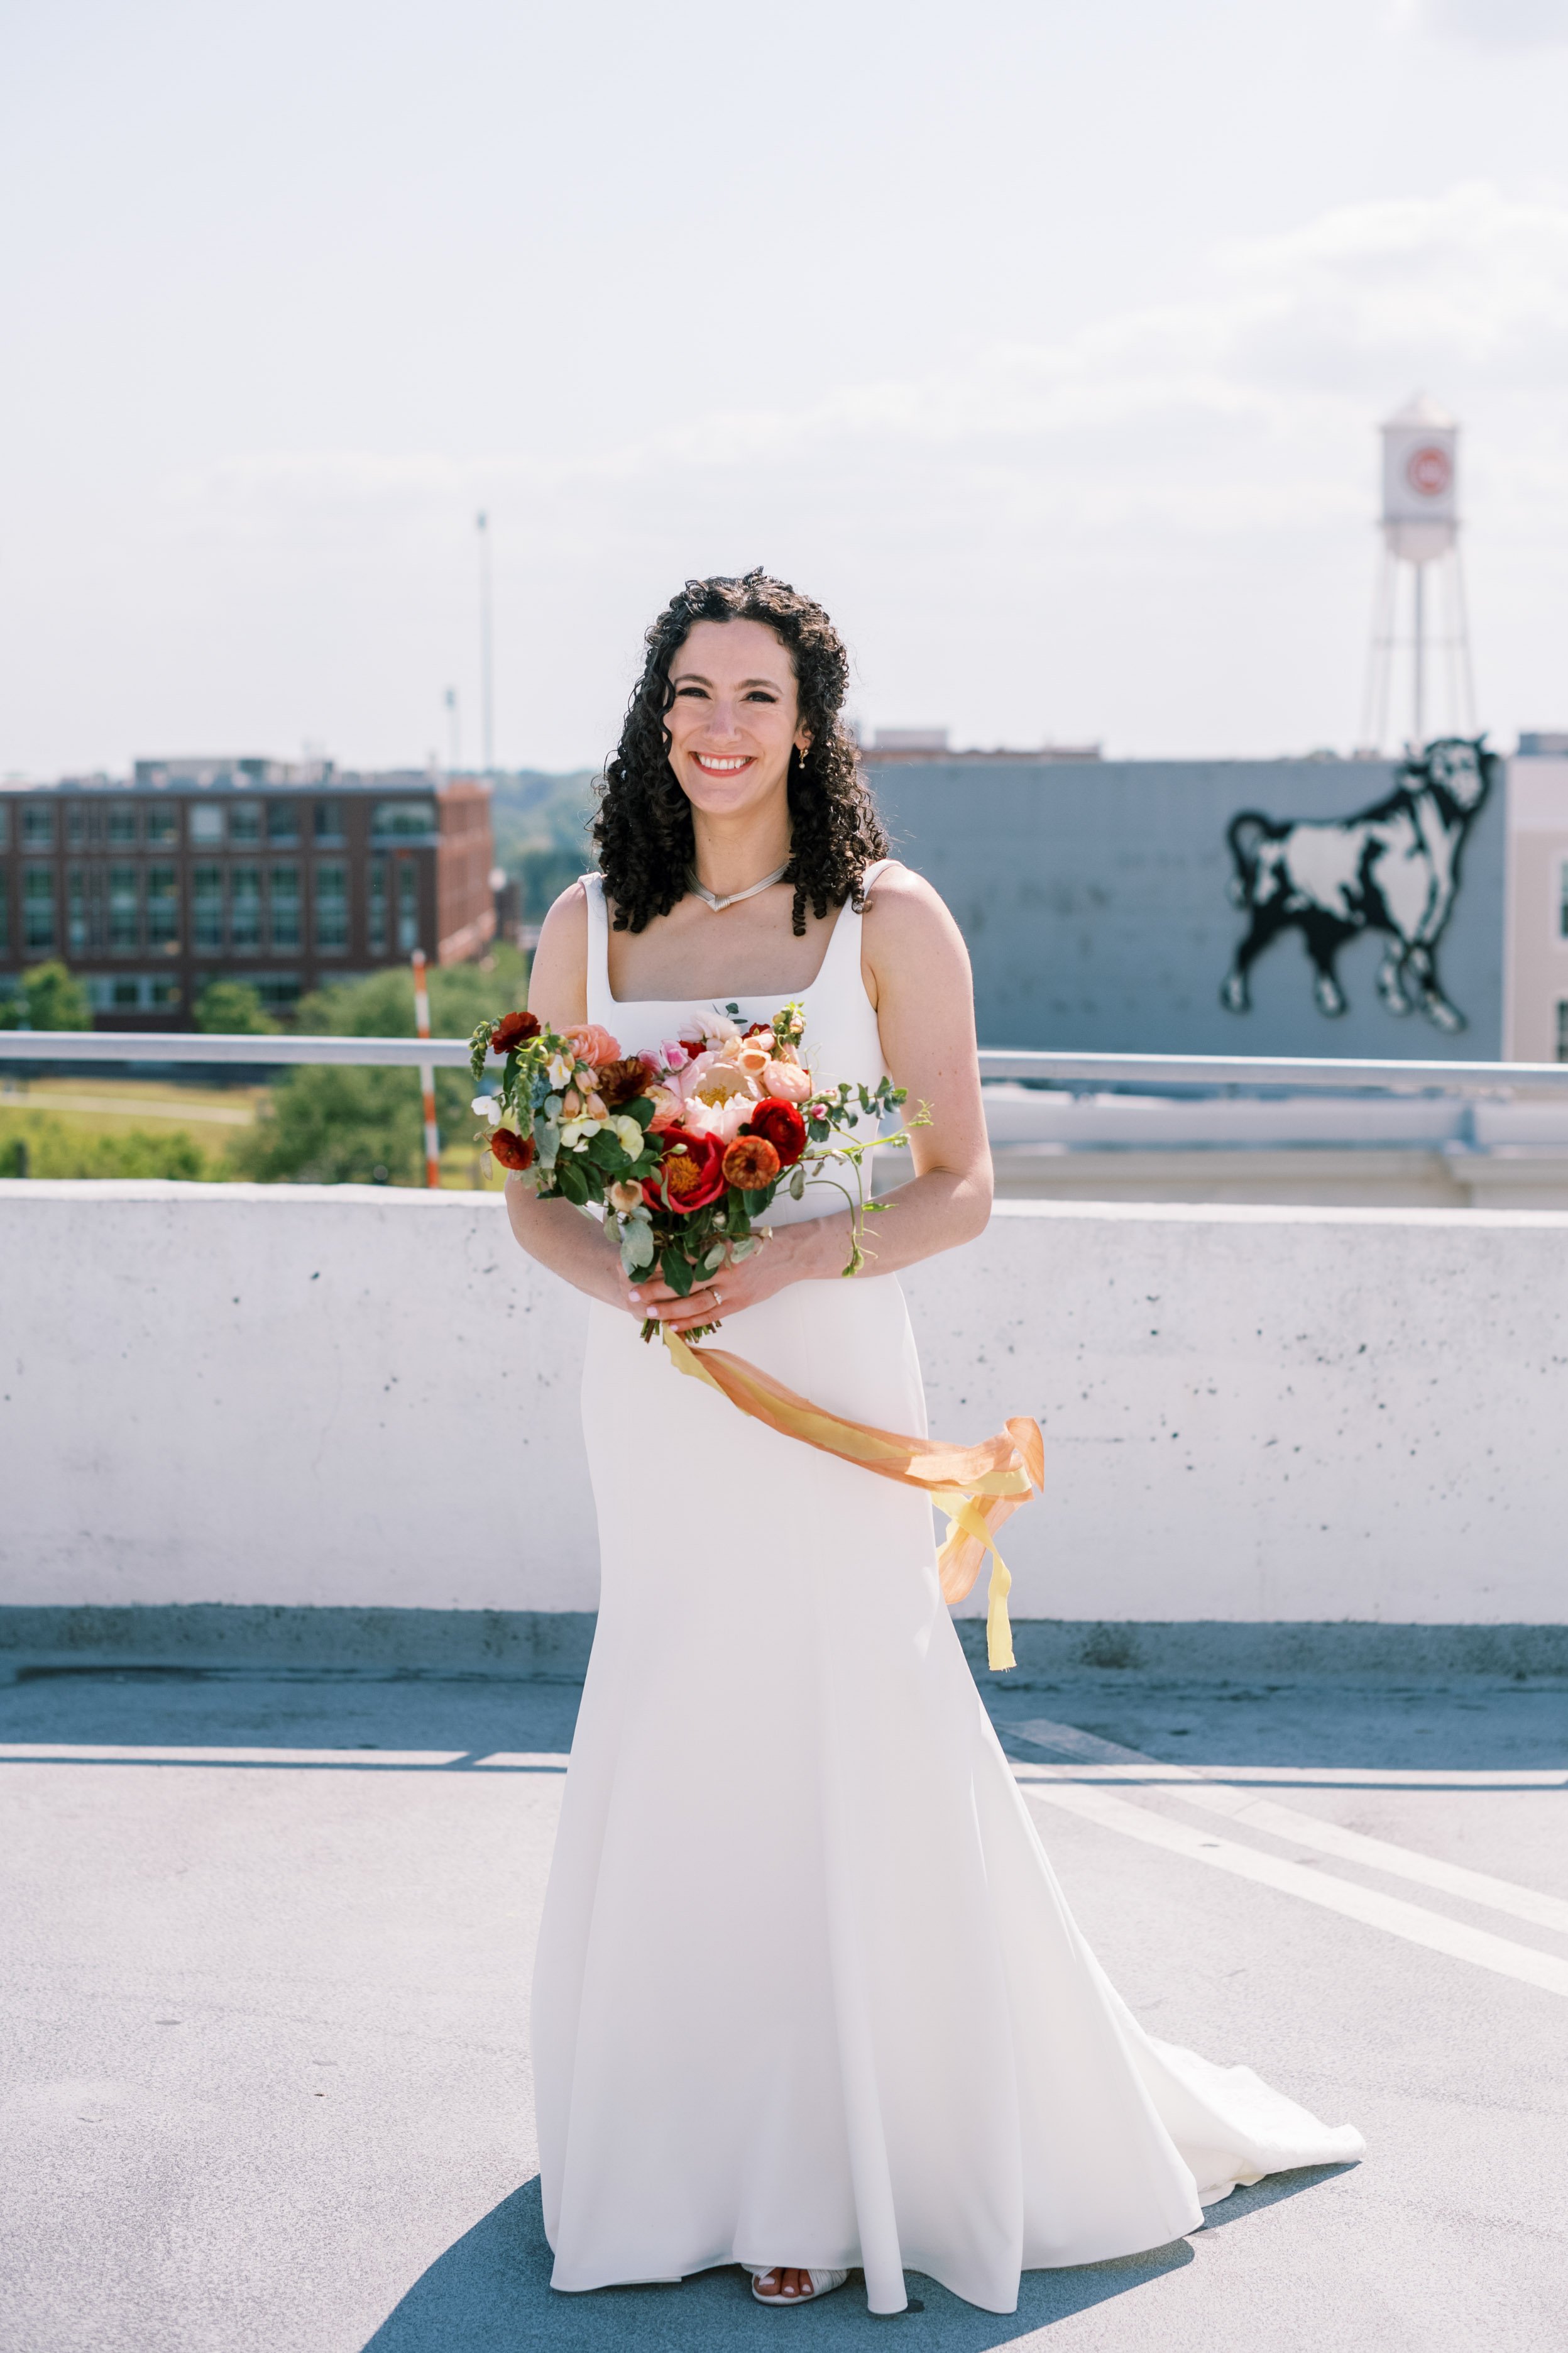 Beautiful Bride Colorful Bouquet 21c Museum Hotel Durham Wedding Fancy This Photography